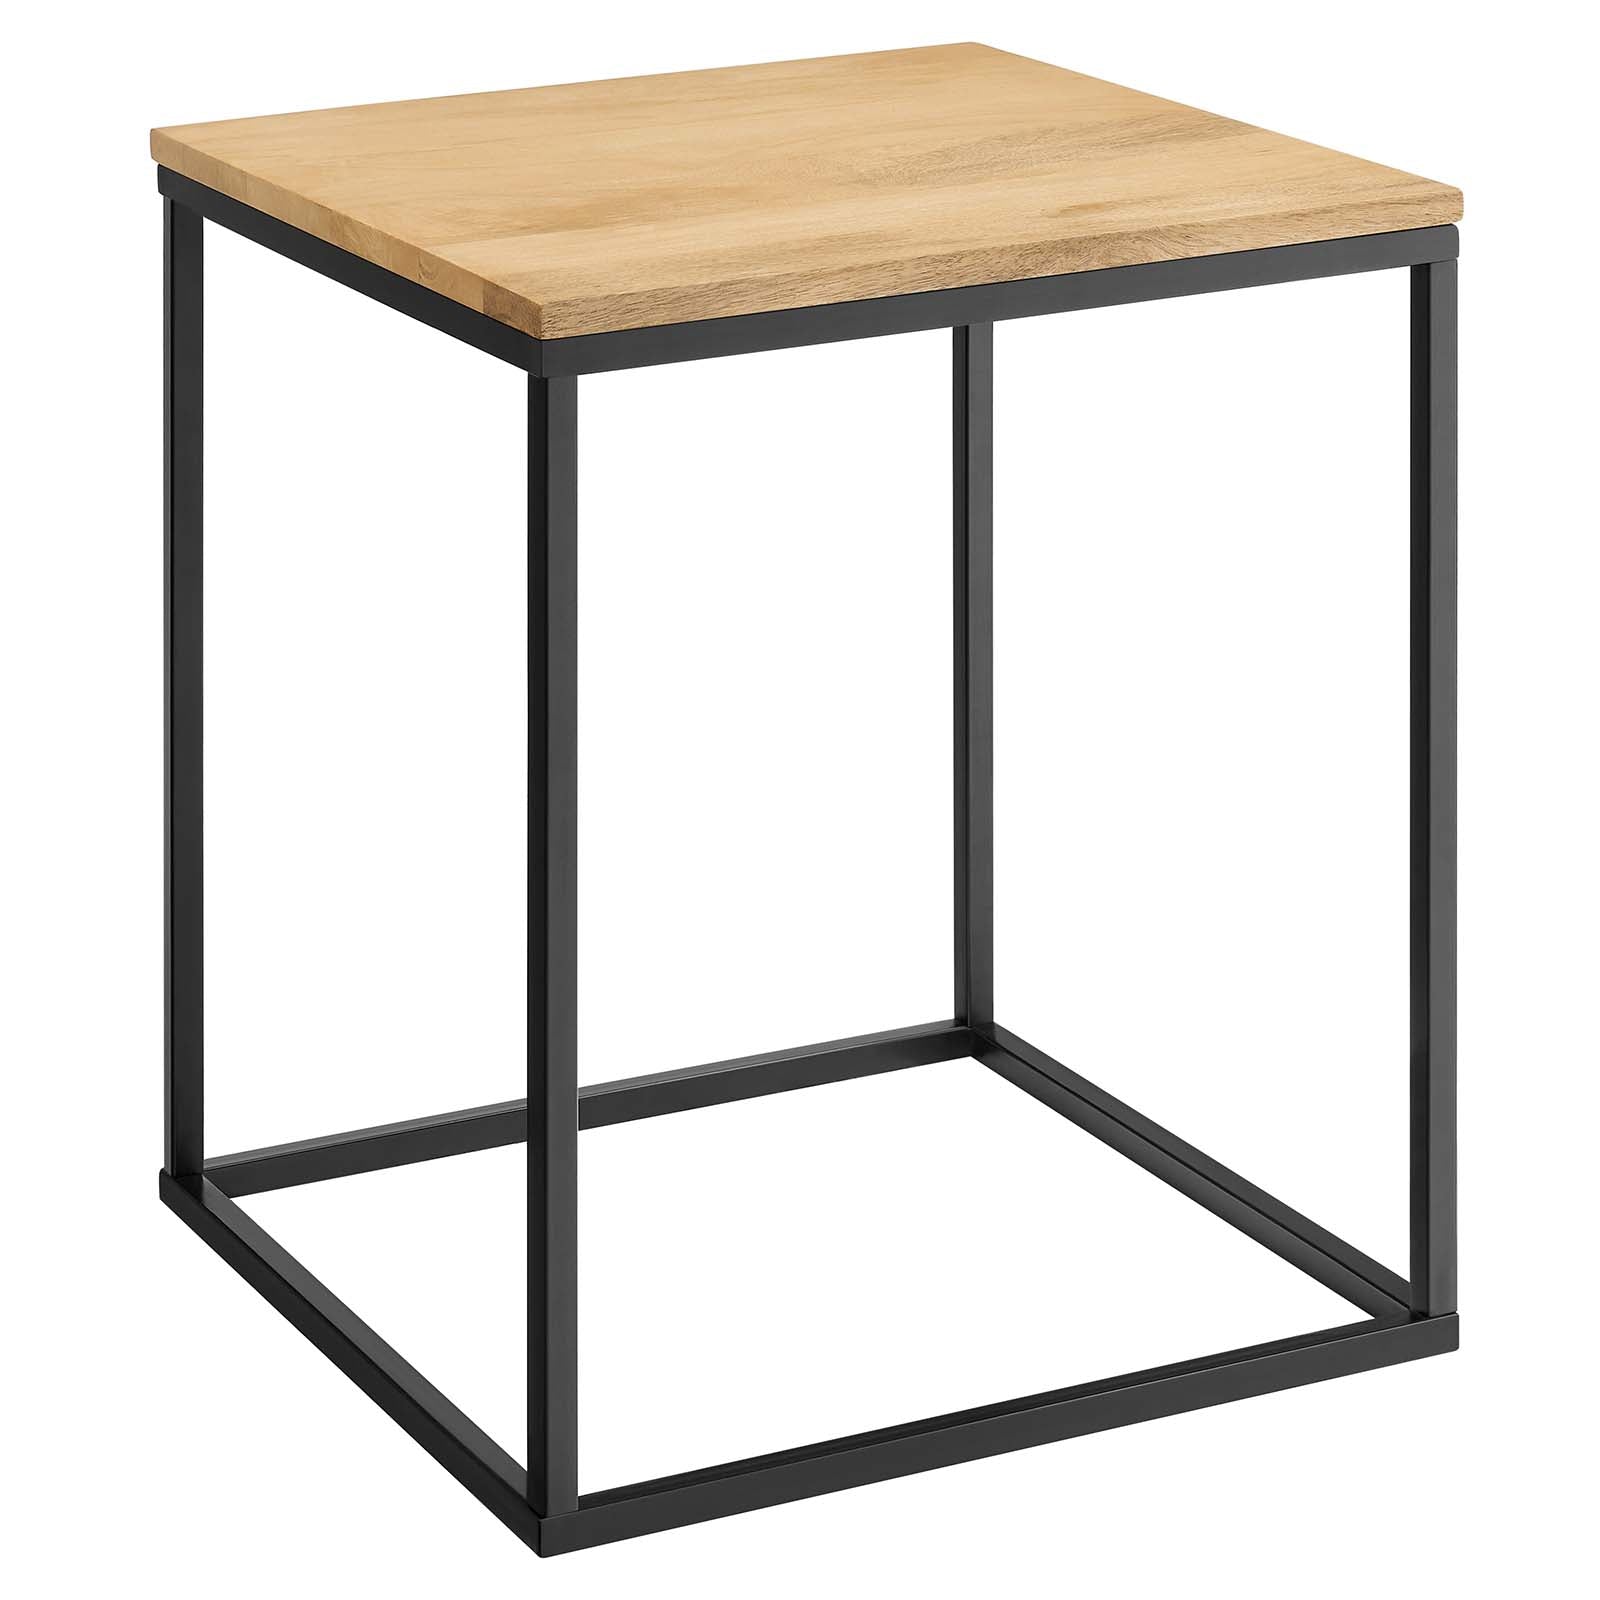 Zora Square Wood and Metal Side Table